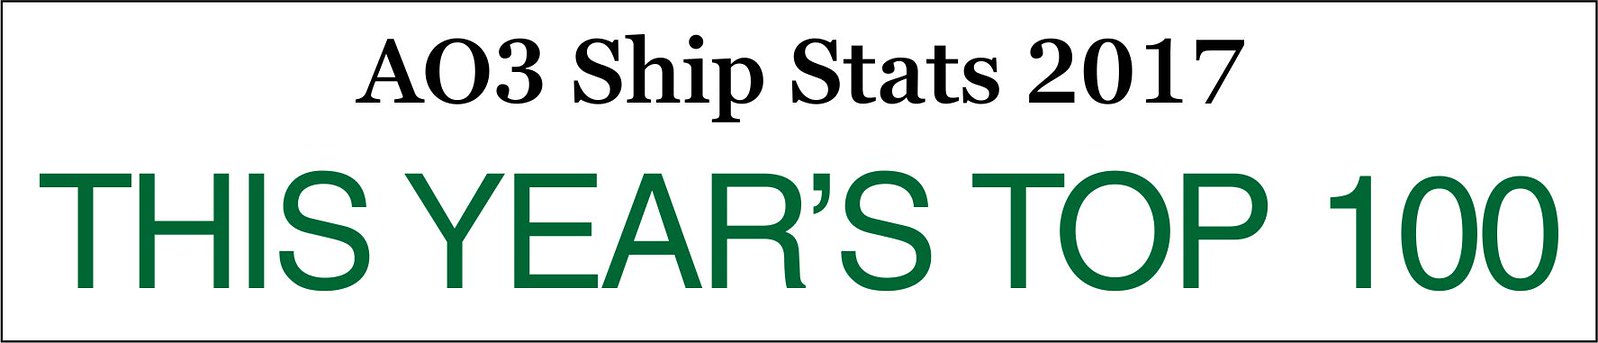 Banner reading: "AO3 Ship Stats 2017: This Year's Top 100"